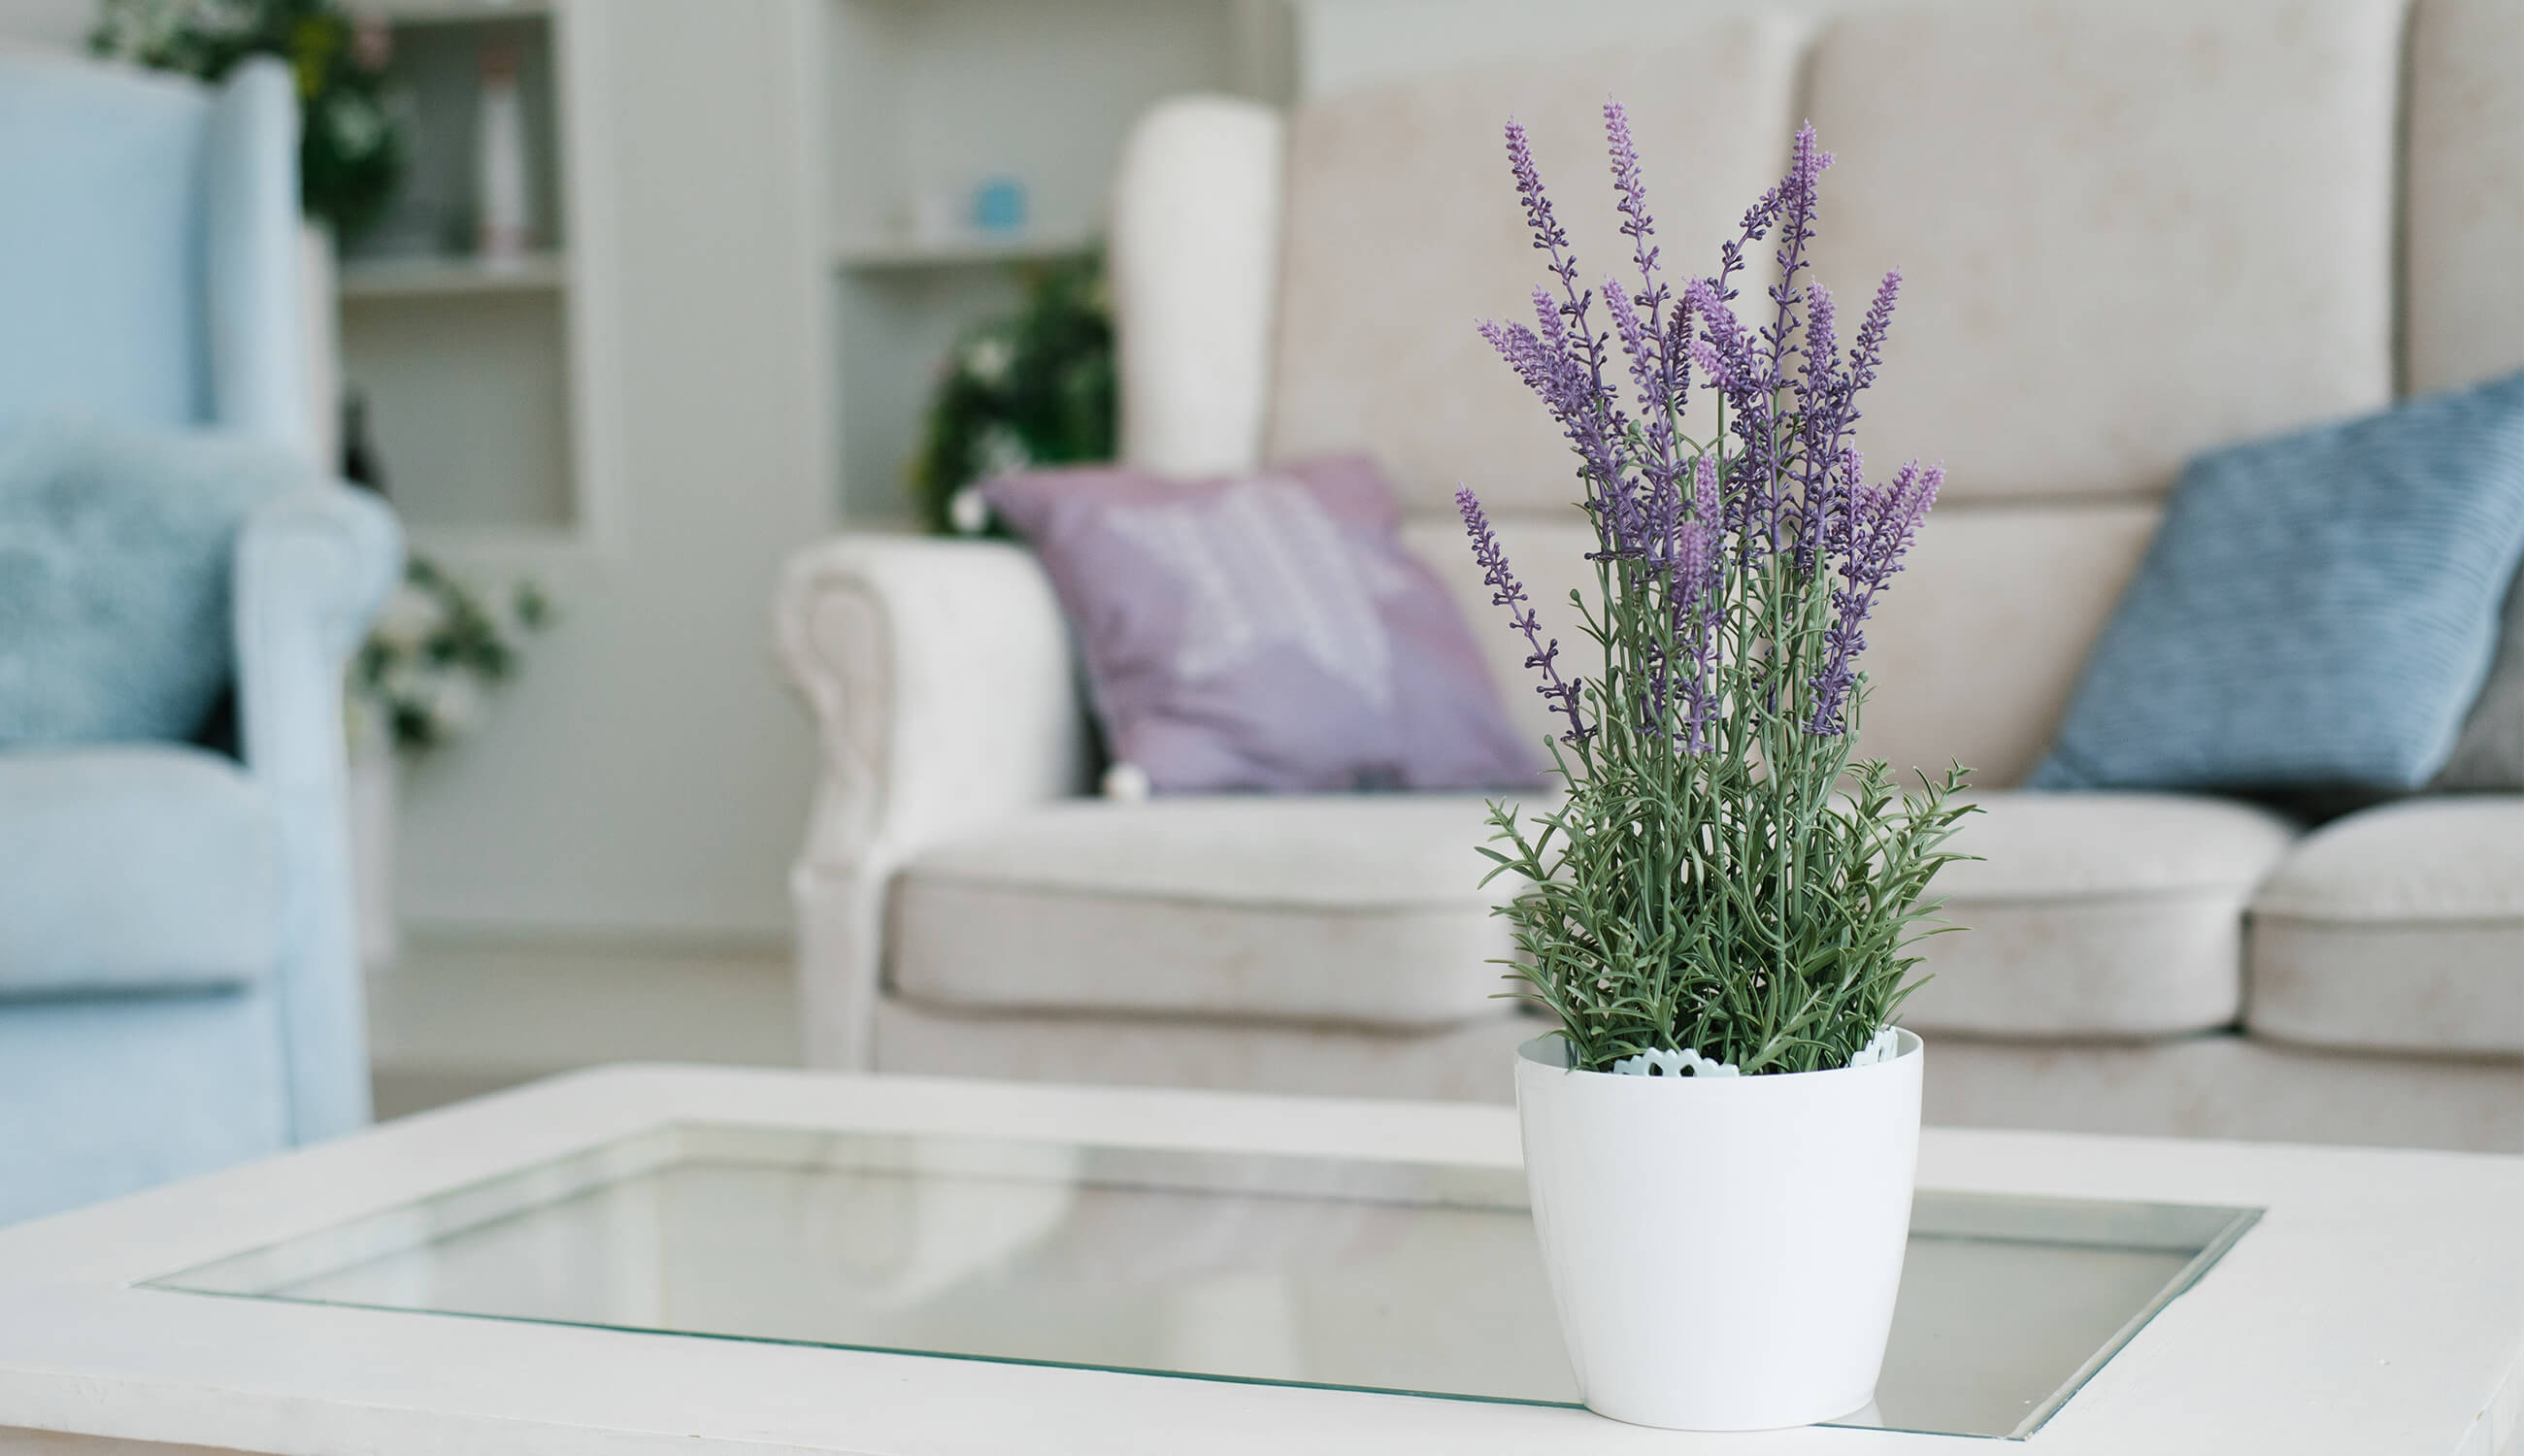 Lavender in the living room